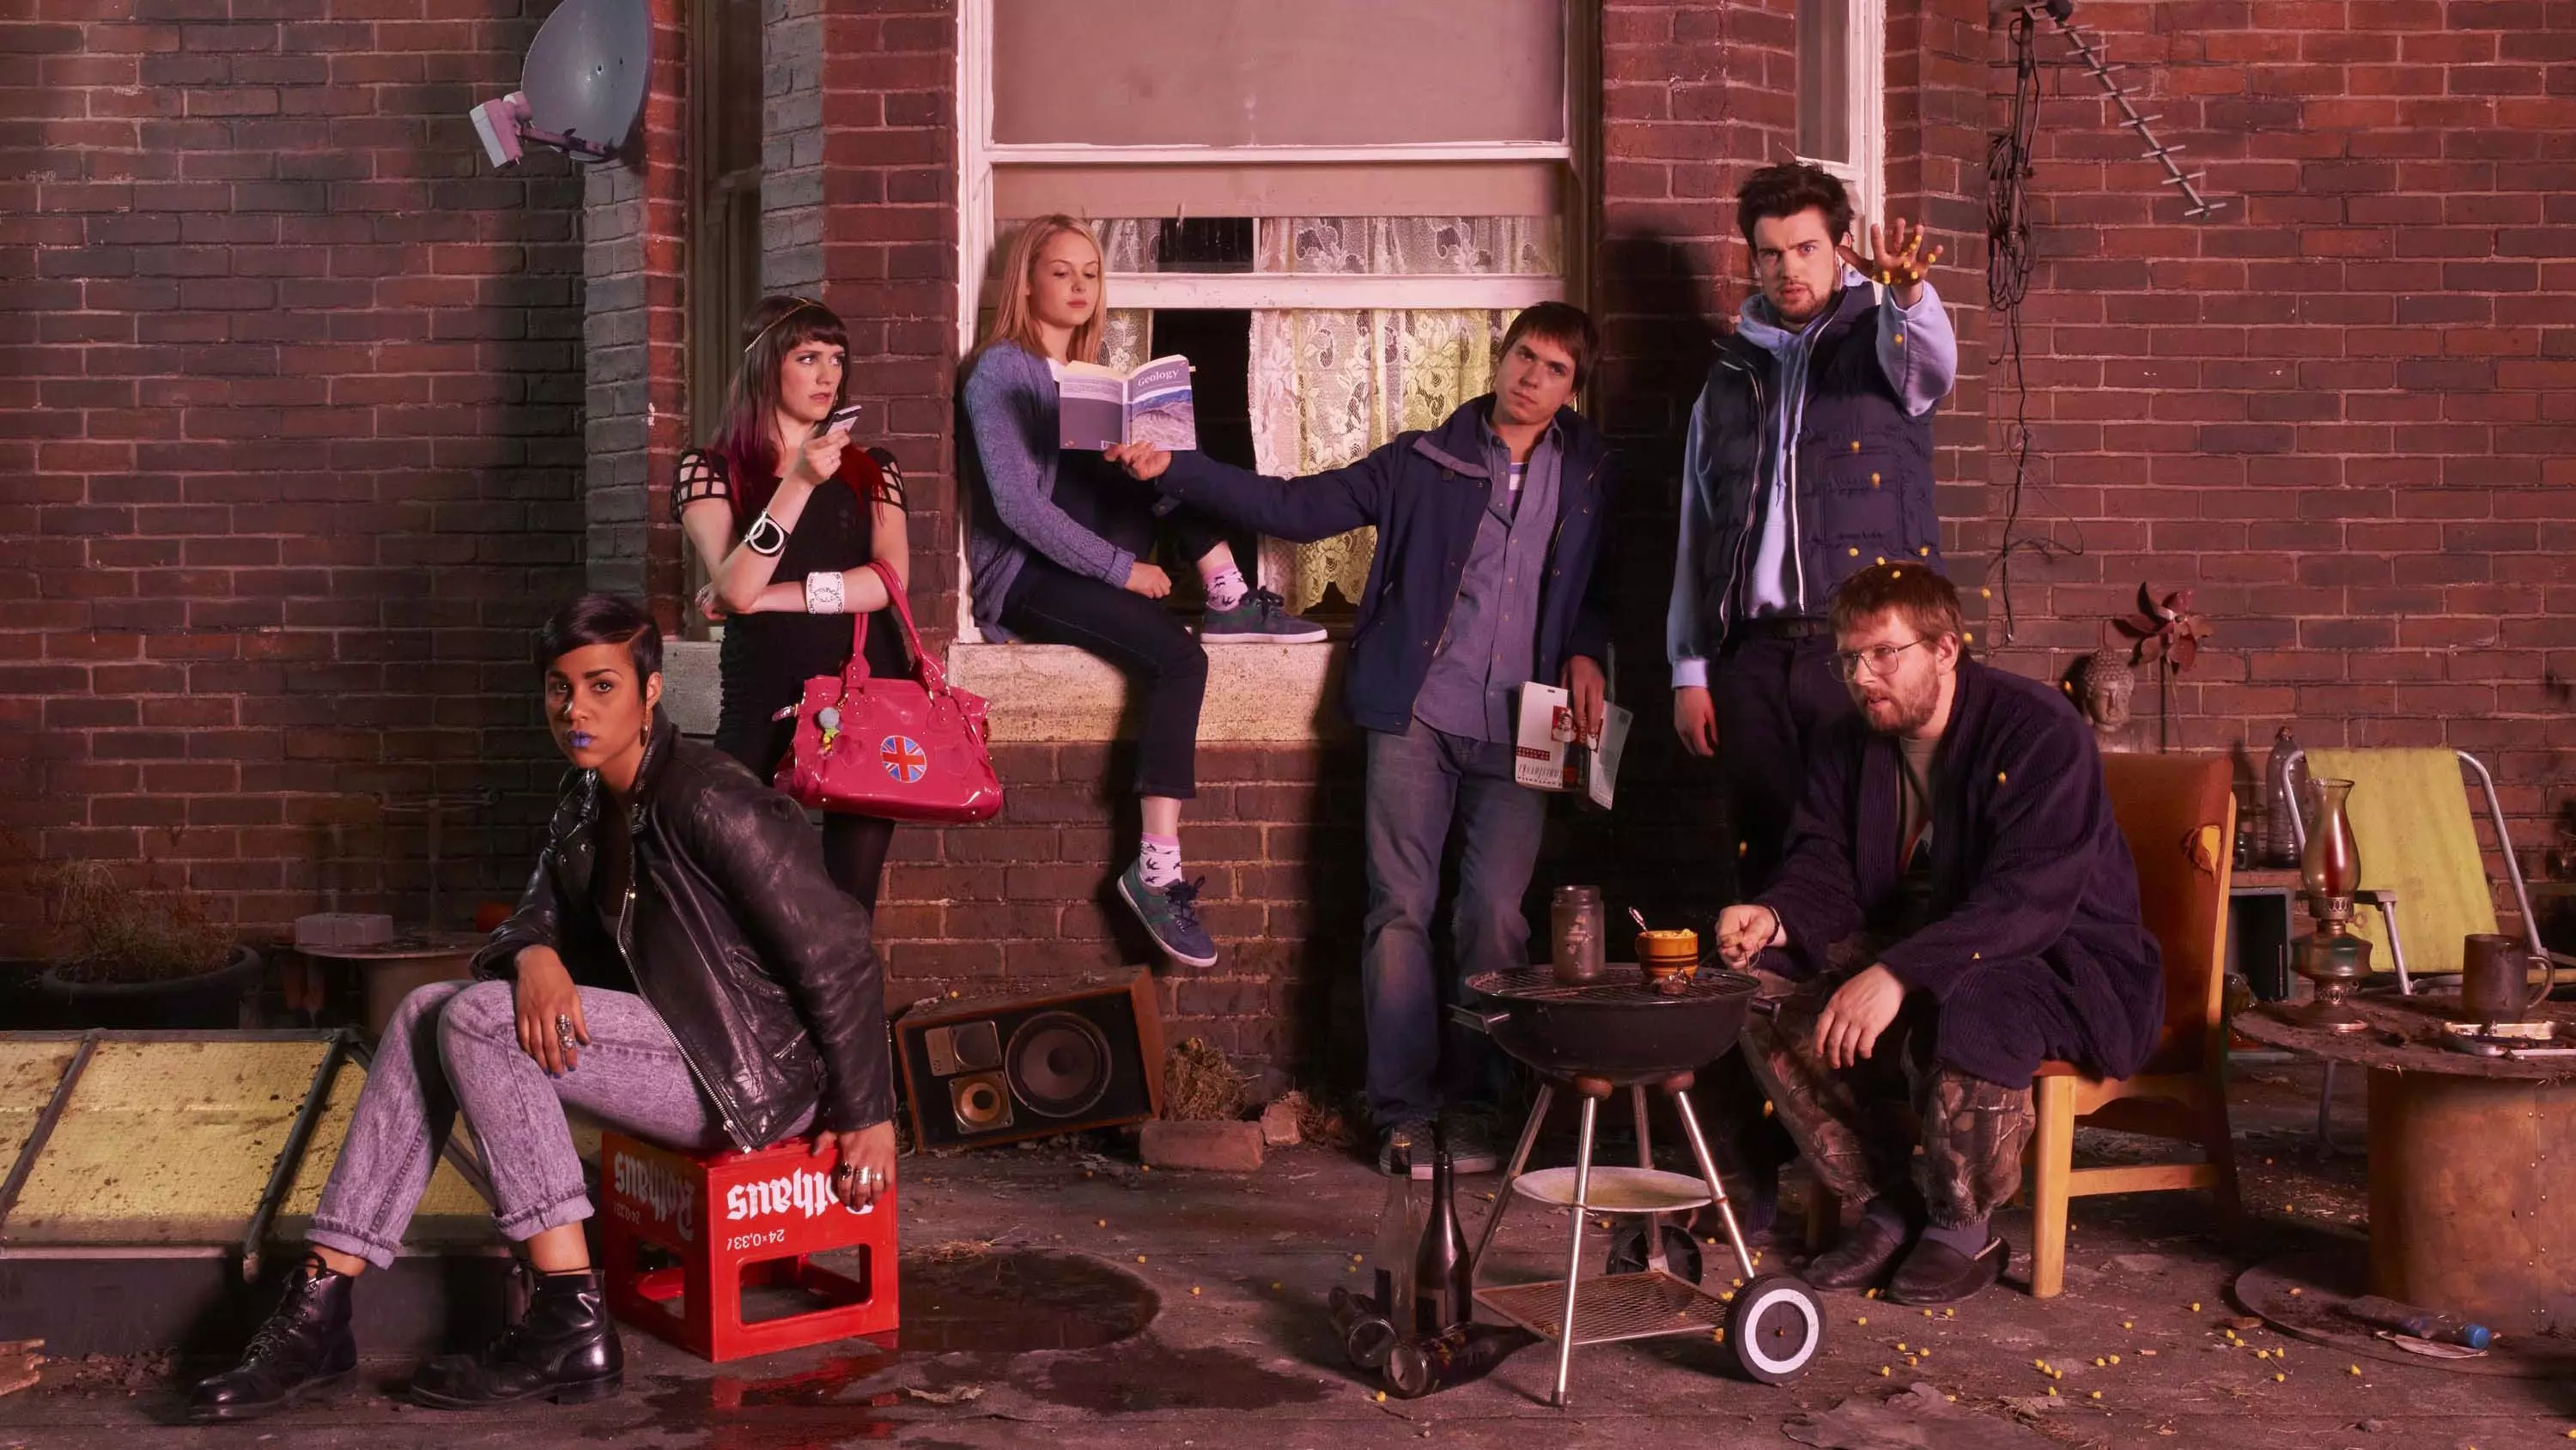 I Stomped Around Manchester To Visit The Real Life Locations From ‘Fresh Meat’